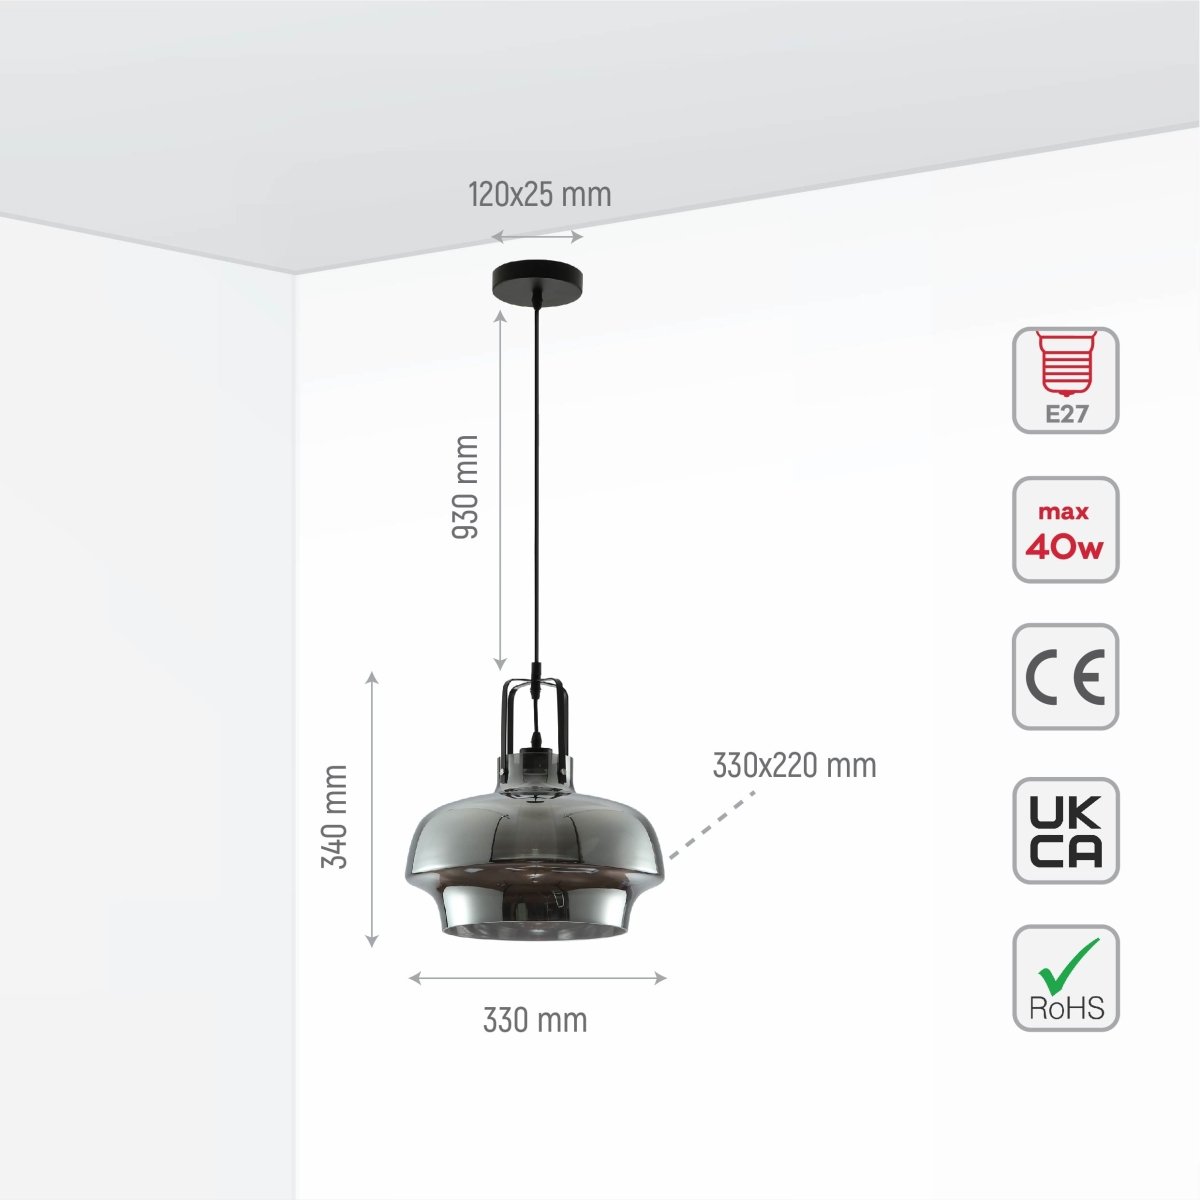 Size and specs of Black Metal Smoky Glass Step Pendant Ceiling Light D240 with E27 Fitting | TEKLED 158-19746